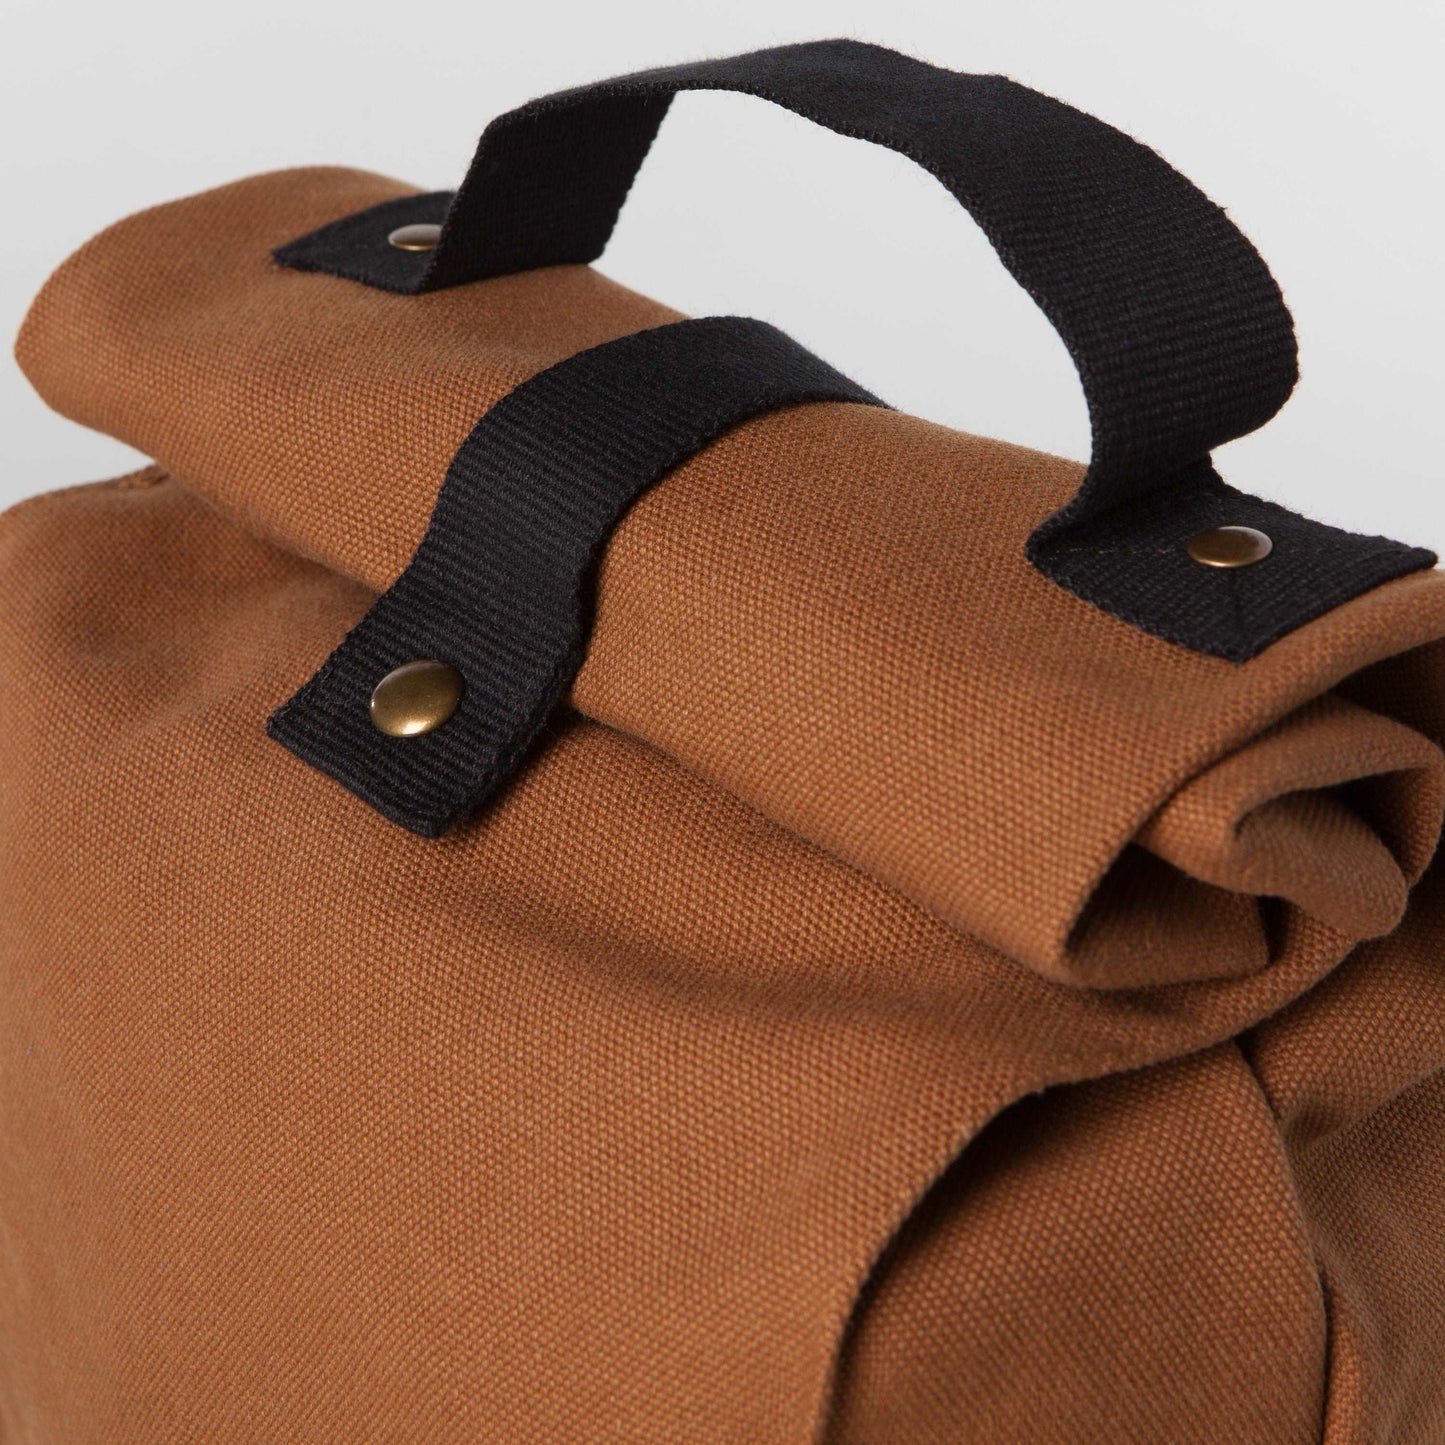 Forage + Gather Lunch Bag - Brown